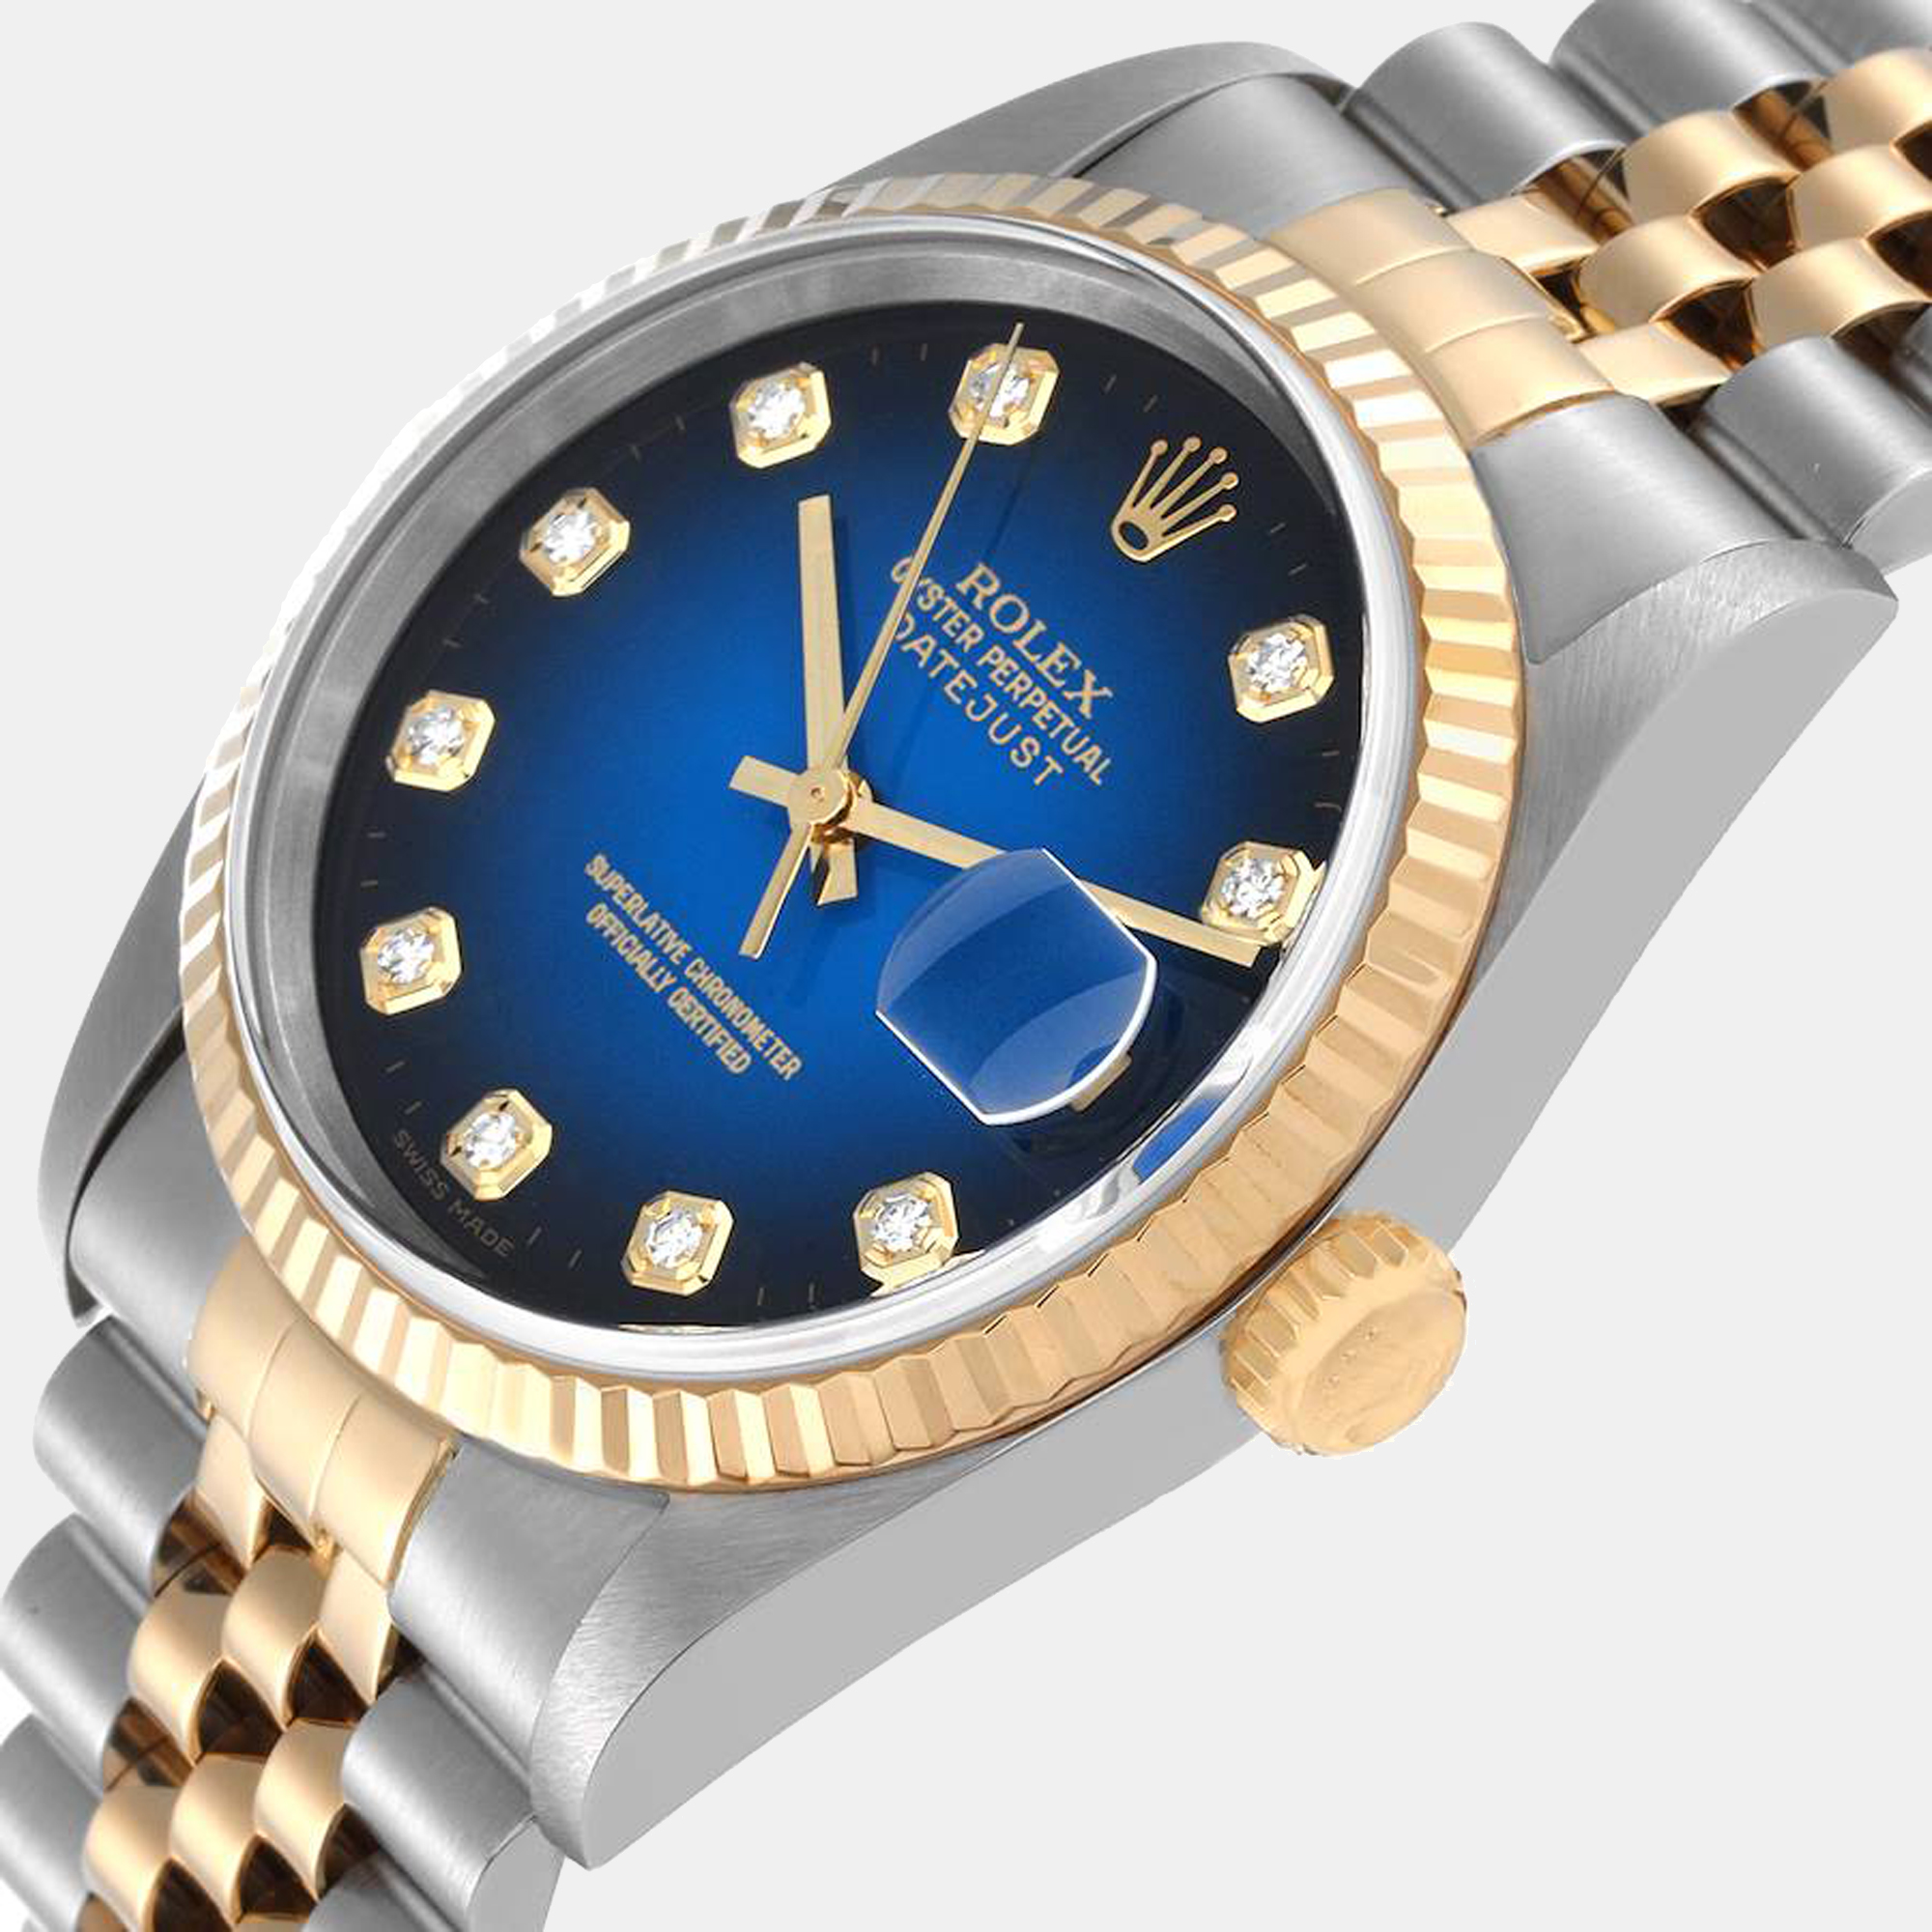 

Rolex Blue Diamonds 18k Yellow Gold And Stainless Steel Datejust 16233 Men's Wristwatch 36 mm